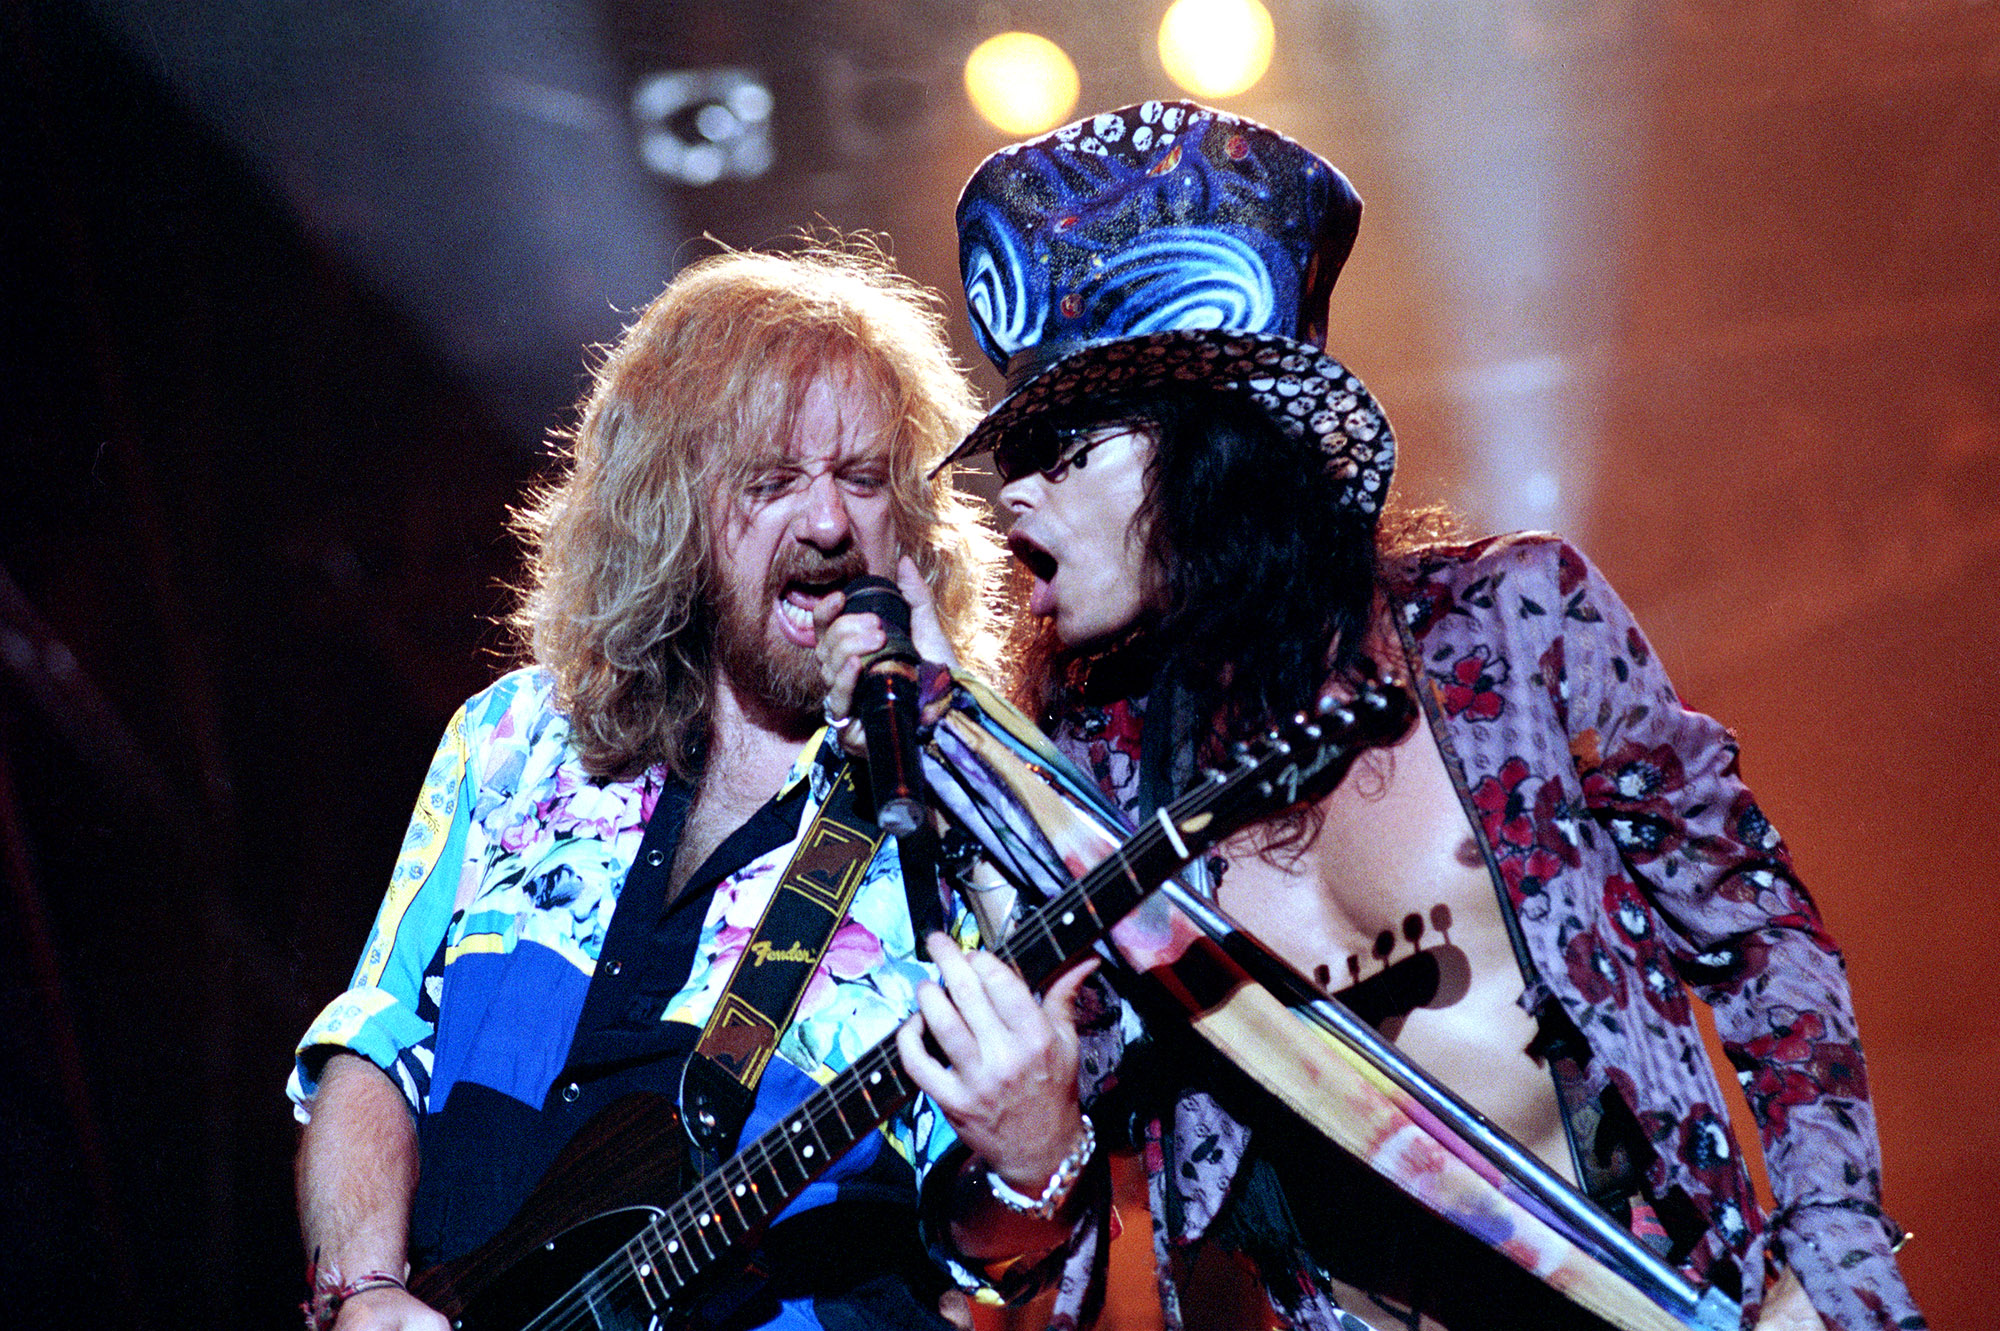 Milan Italy, from 07-08 July 1994, Music Festival  live concerts "Sonoria 1994" at the Aquatica Park : The singer of the Aerosmith Steven Tyler and the guitarist Brad Whitford during the concert